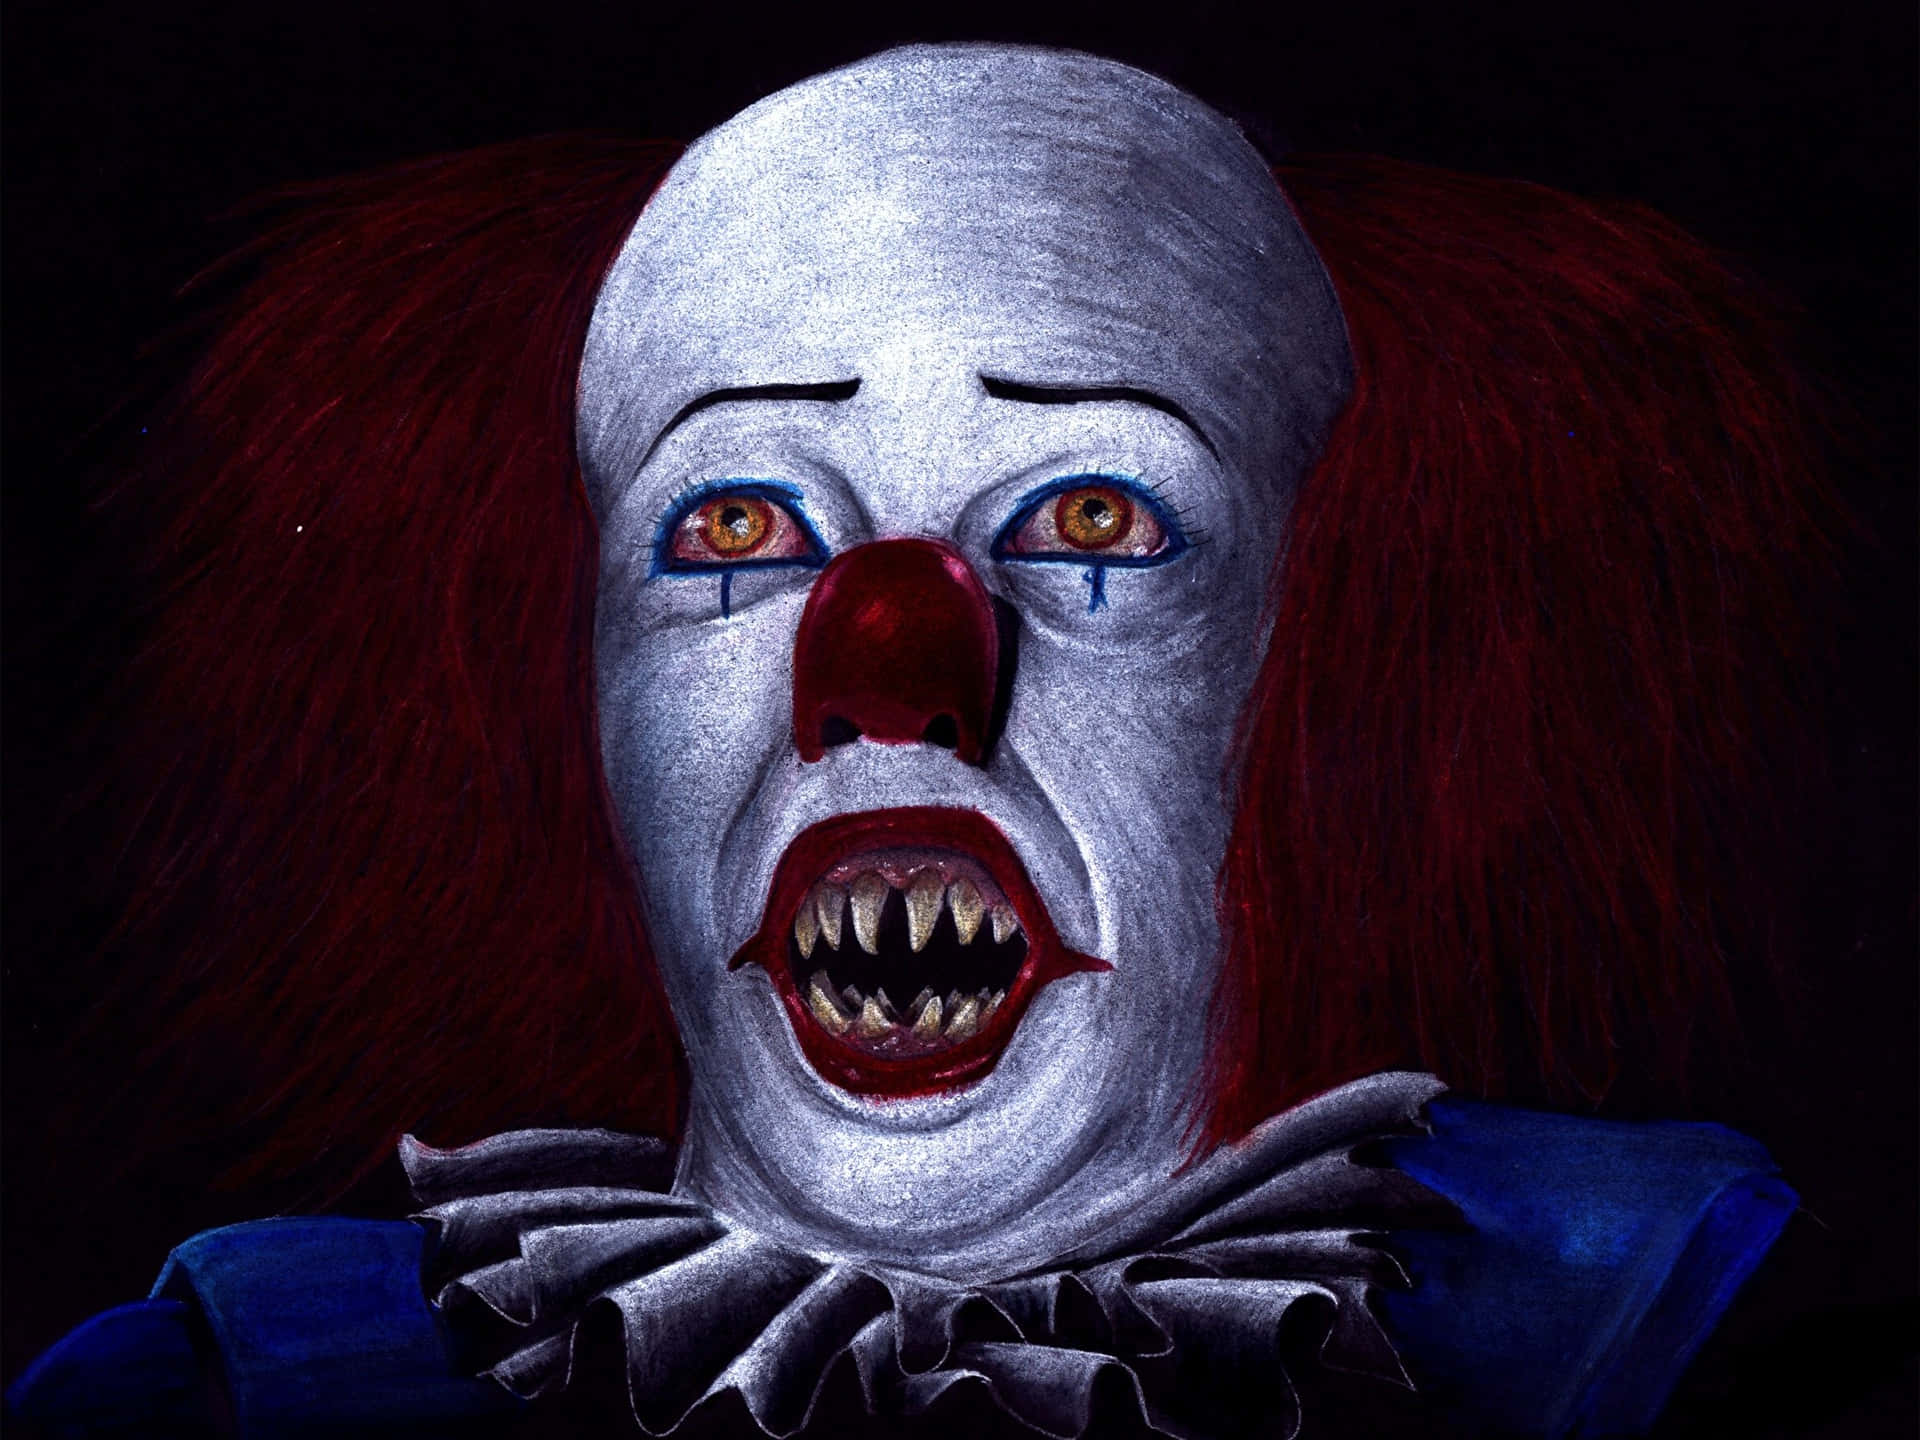 Imagensdo Pennywise.